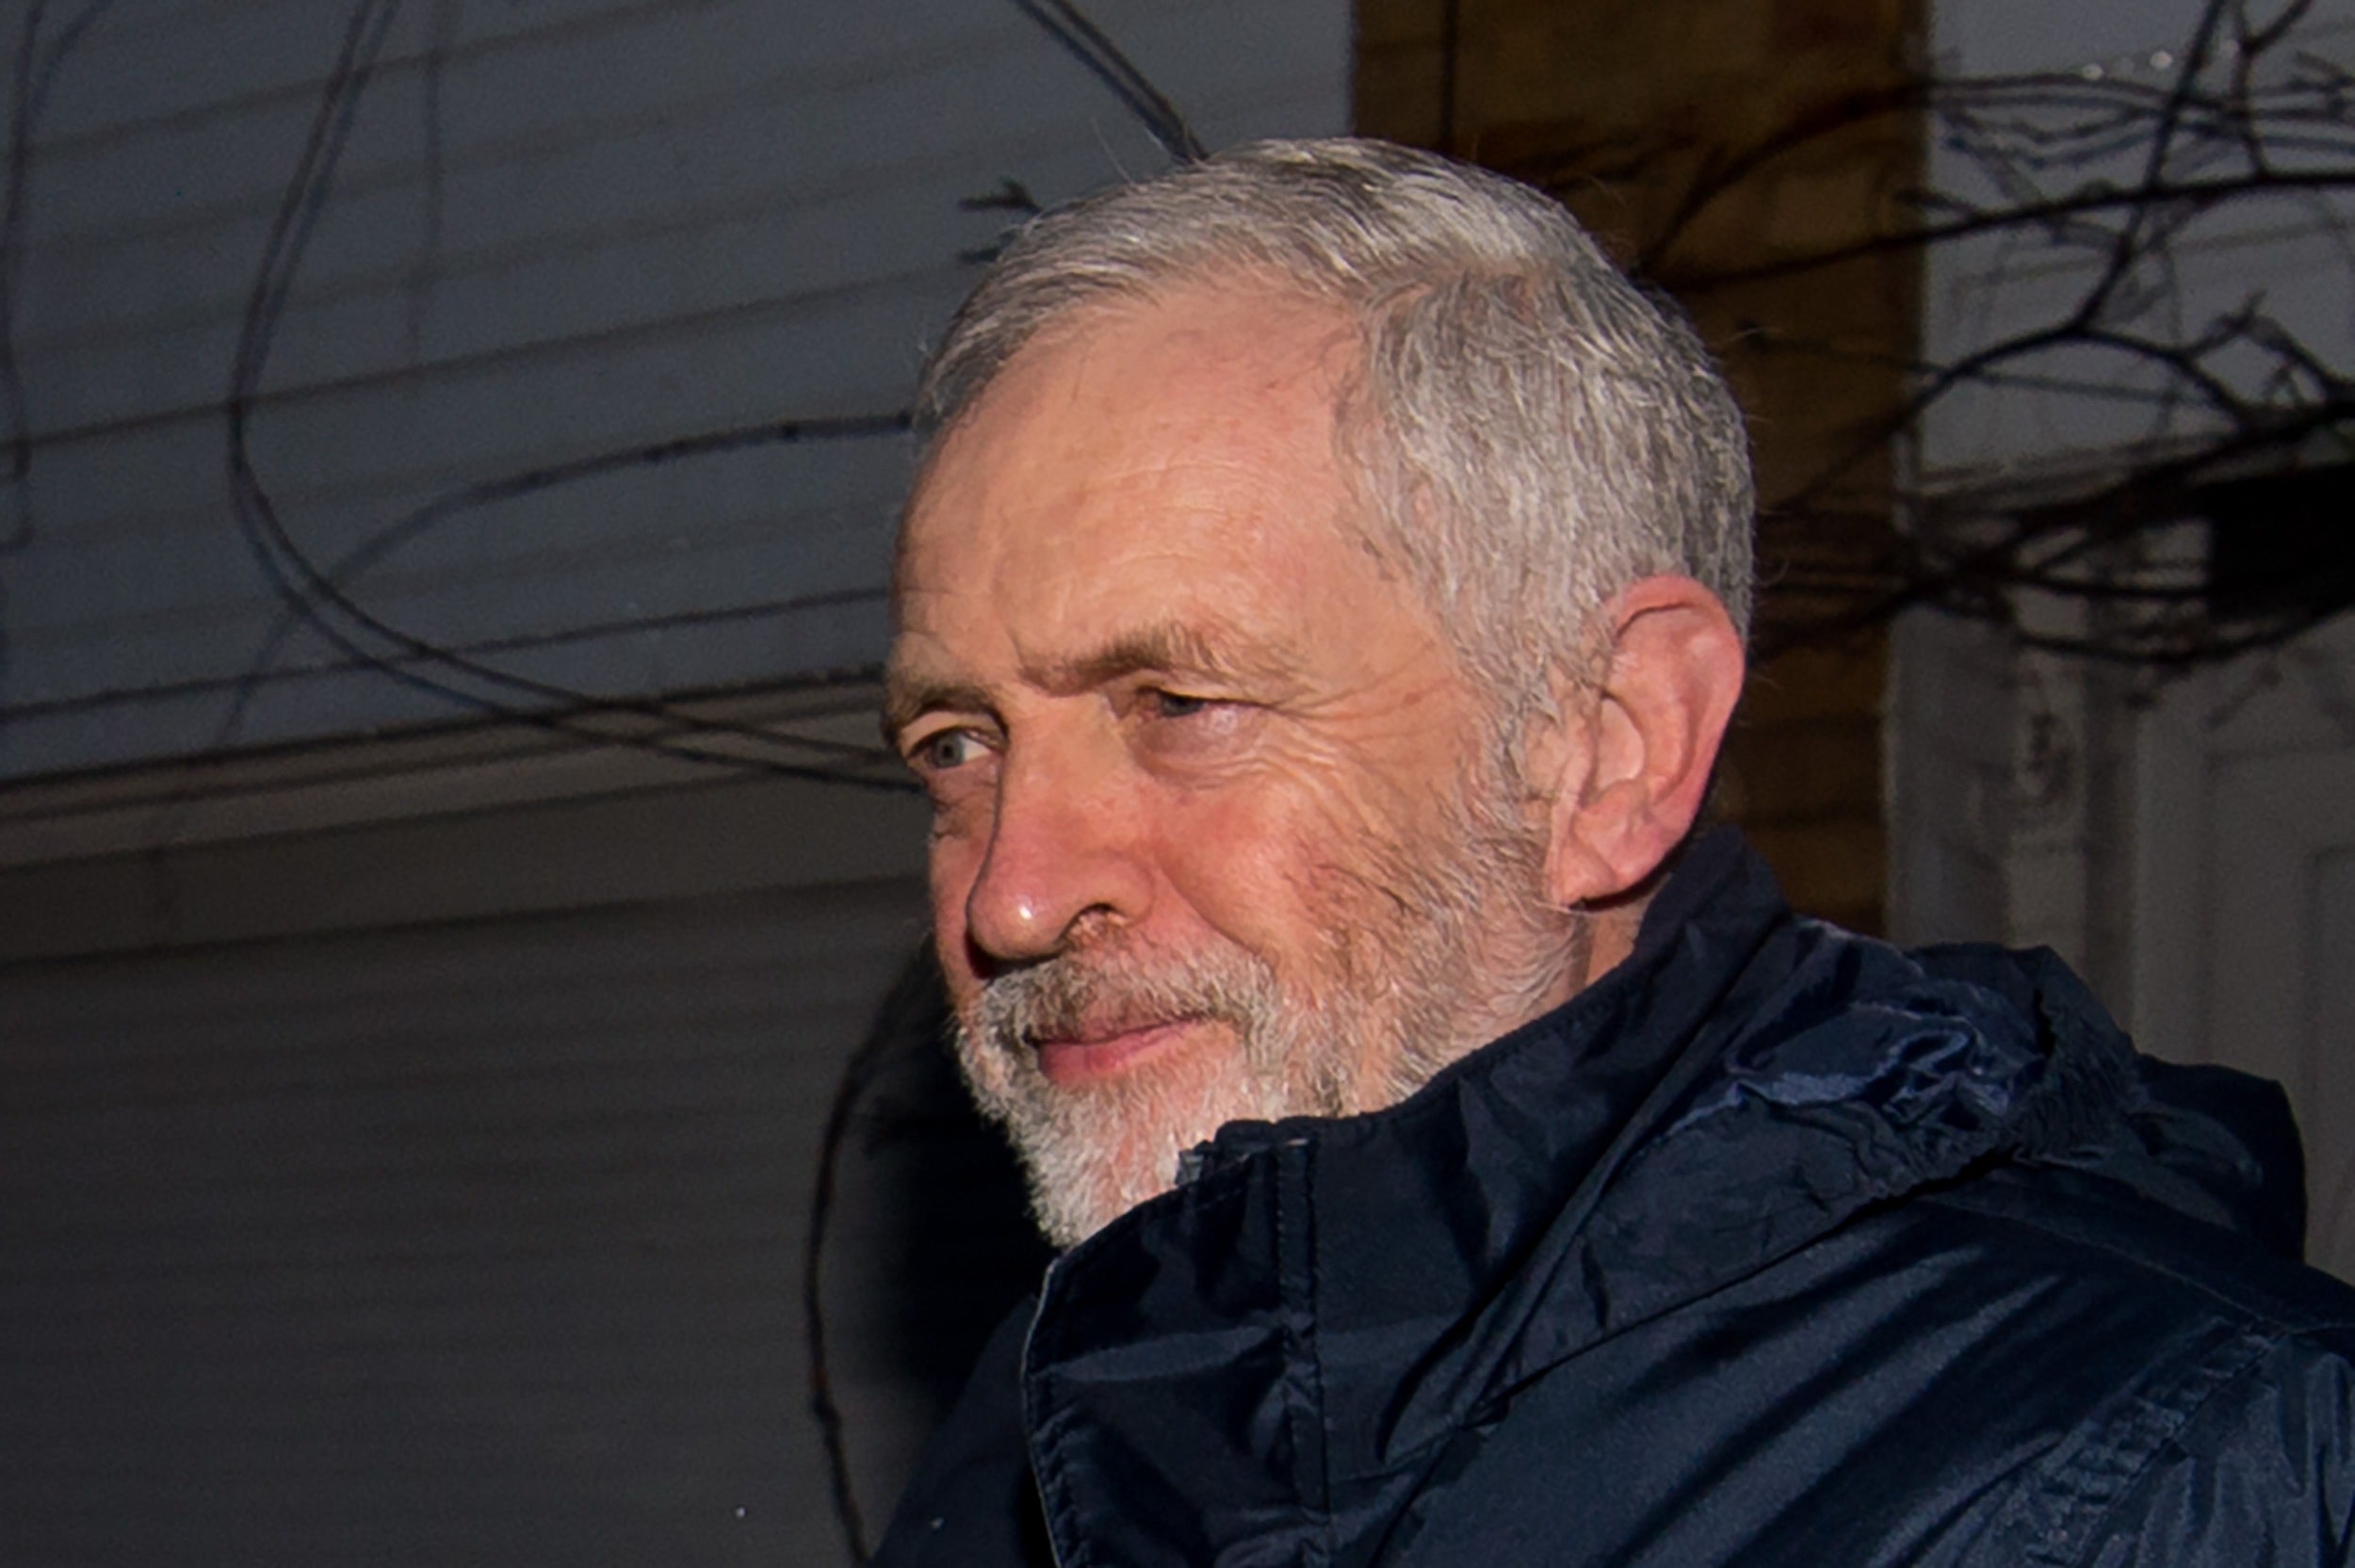 Corbyn's Twitter account appeared to have been hacked